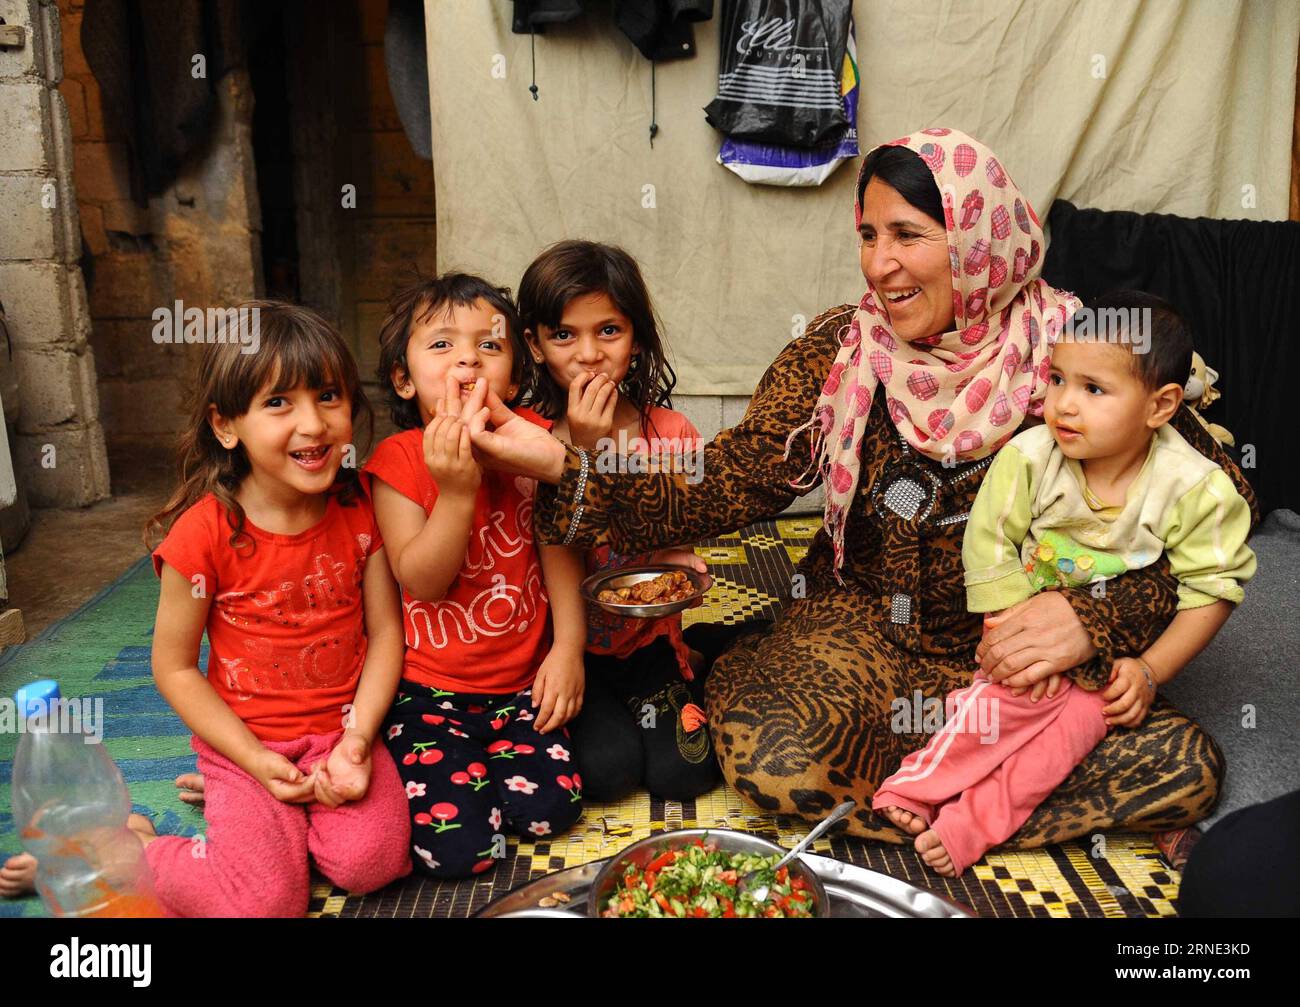 (160607) -- DAMASCUS, June 7, 2016 -- The family members of Abu Ali gather around a breakfast table to break their fast of the holy month of Ramadan in Damascus, capital of Syria, on June 7, 2016. The family of six escaped the Islamic State (IS) rule in the northern city of al-Raqqa and sought refuge in the Damascus district of Jaramanah. ) SYRIA-DAMASCUS-RAMADAN-IFTAR Ammar PUBLICATIONxNOTxINxCHN   160607 Damascus June 7 2016 The Family Members of Abu Ali gather Around a Breakfast Table to Break their Almost of The Holy Month of Ramadan in Damascus Capital of Syria ON June 7 2016 The Family o Stock Photo